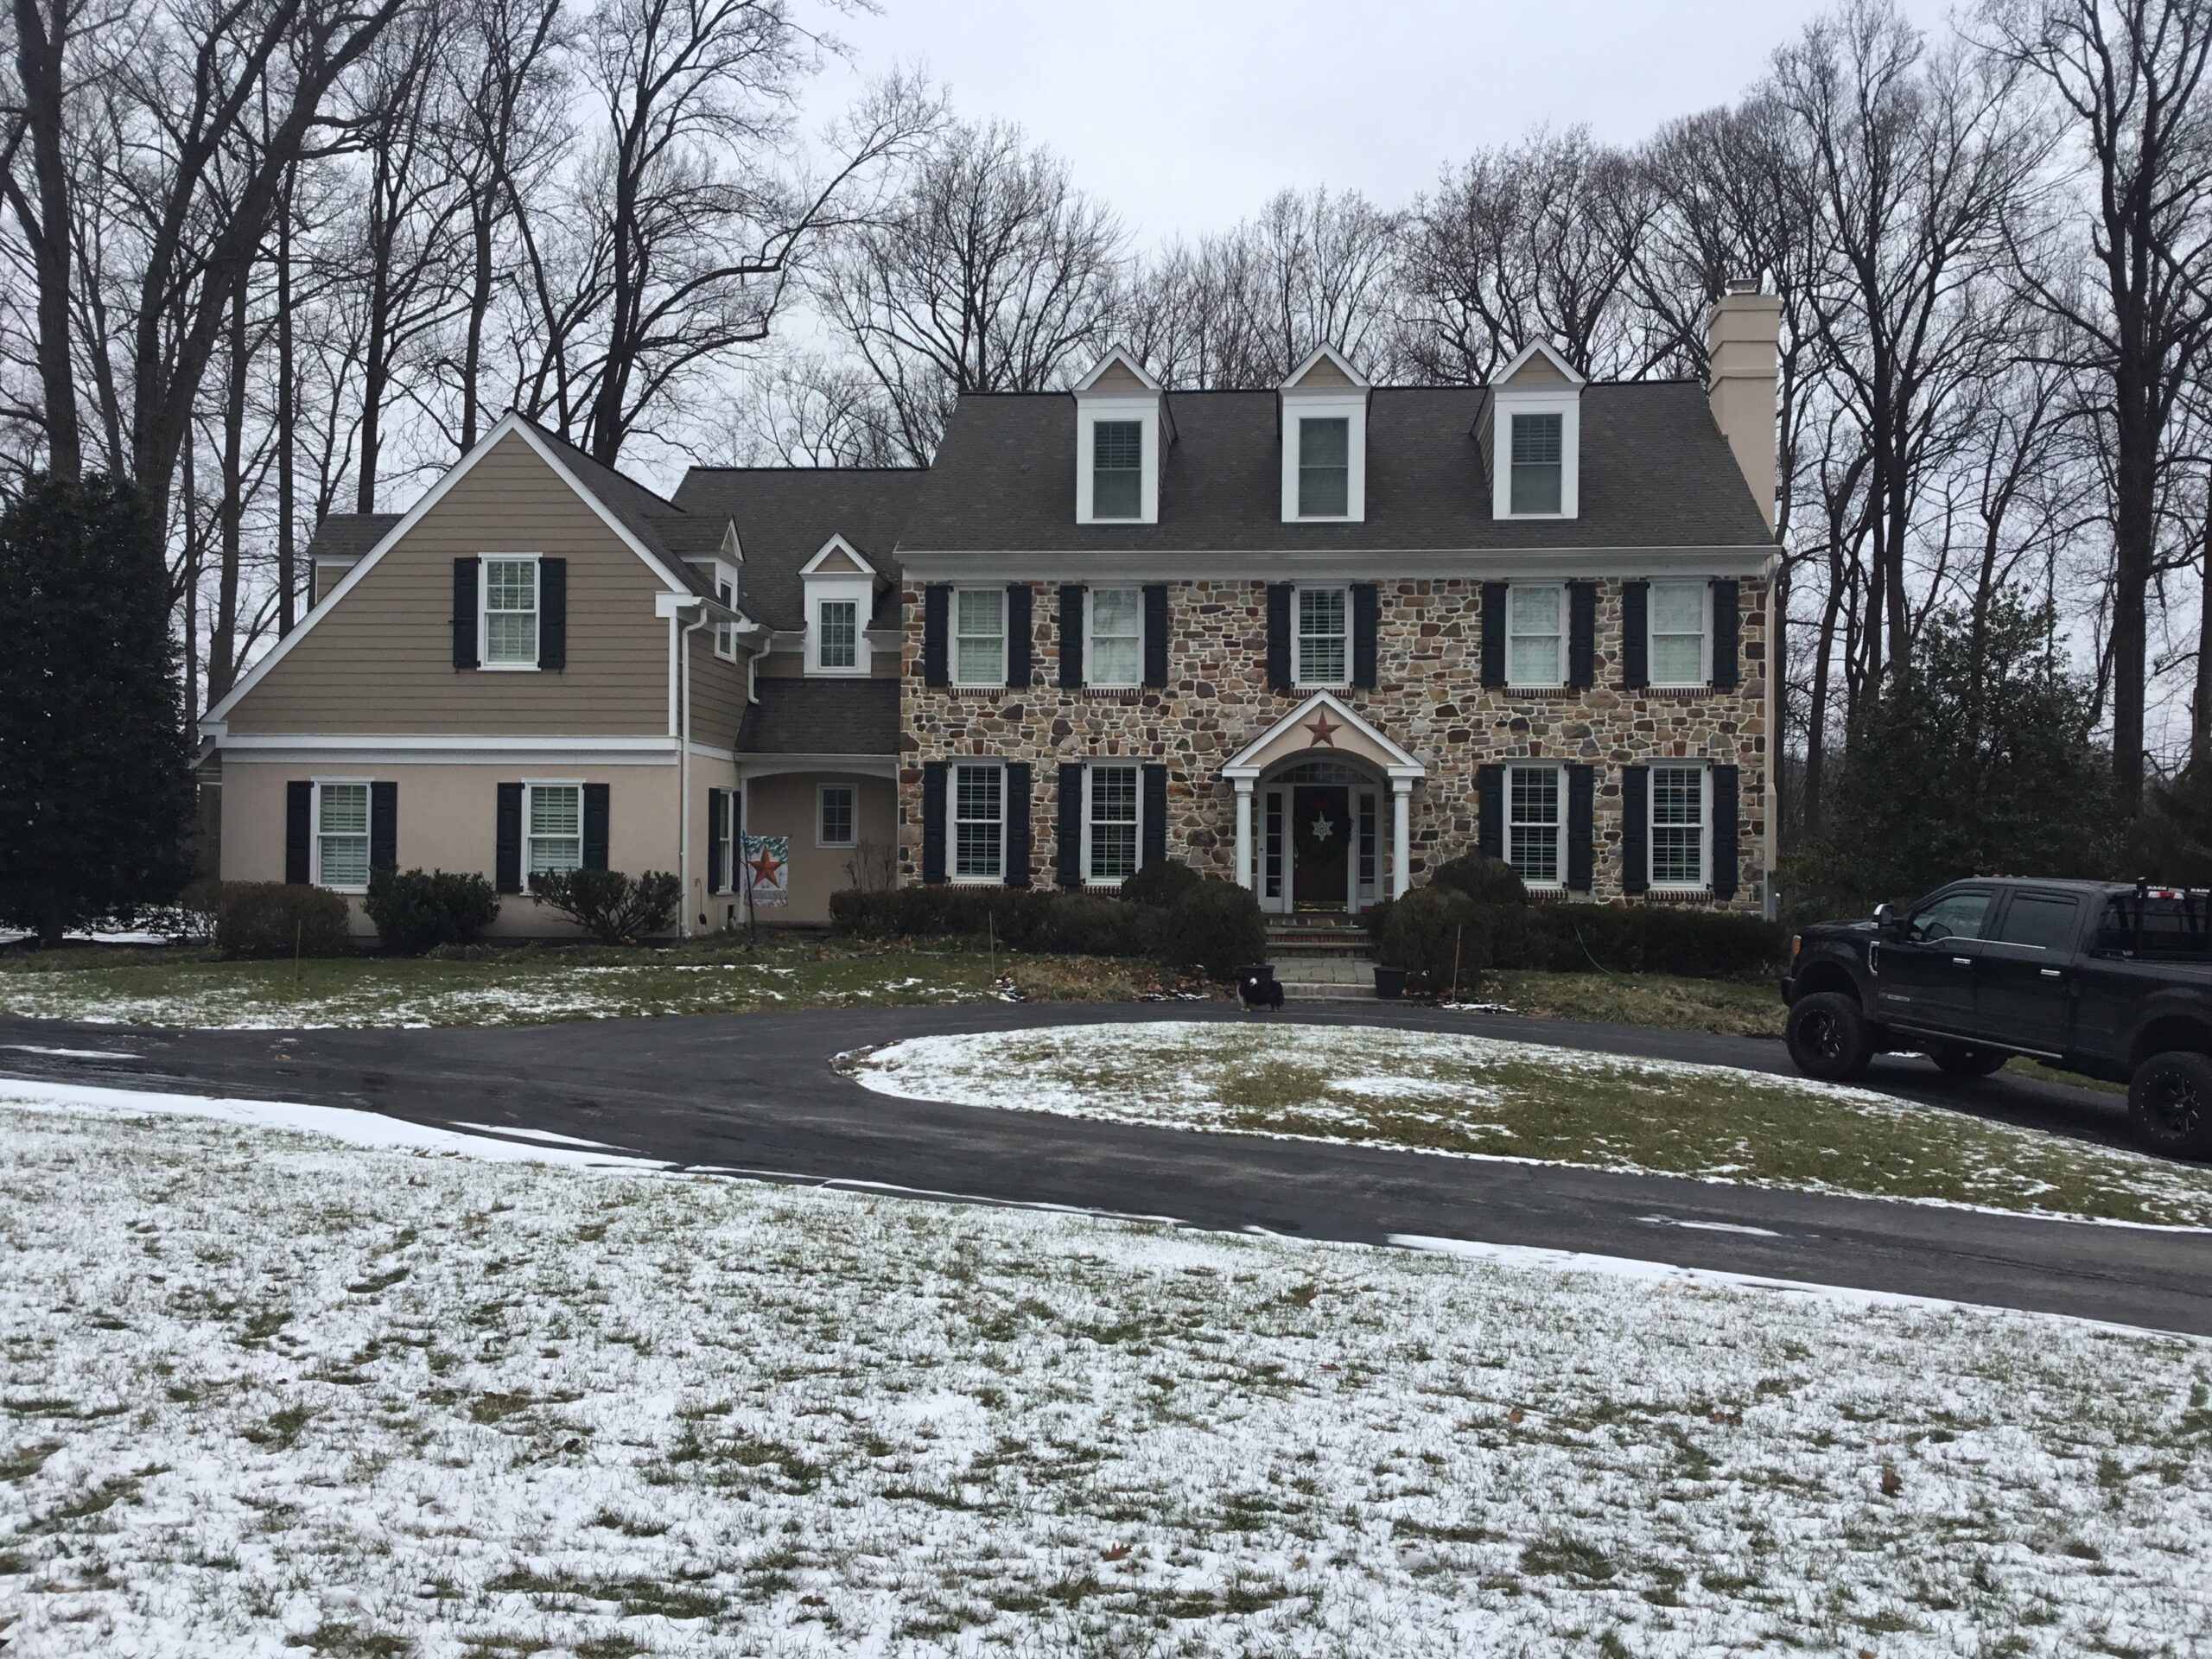 Large home with snow on ground